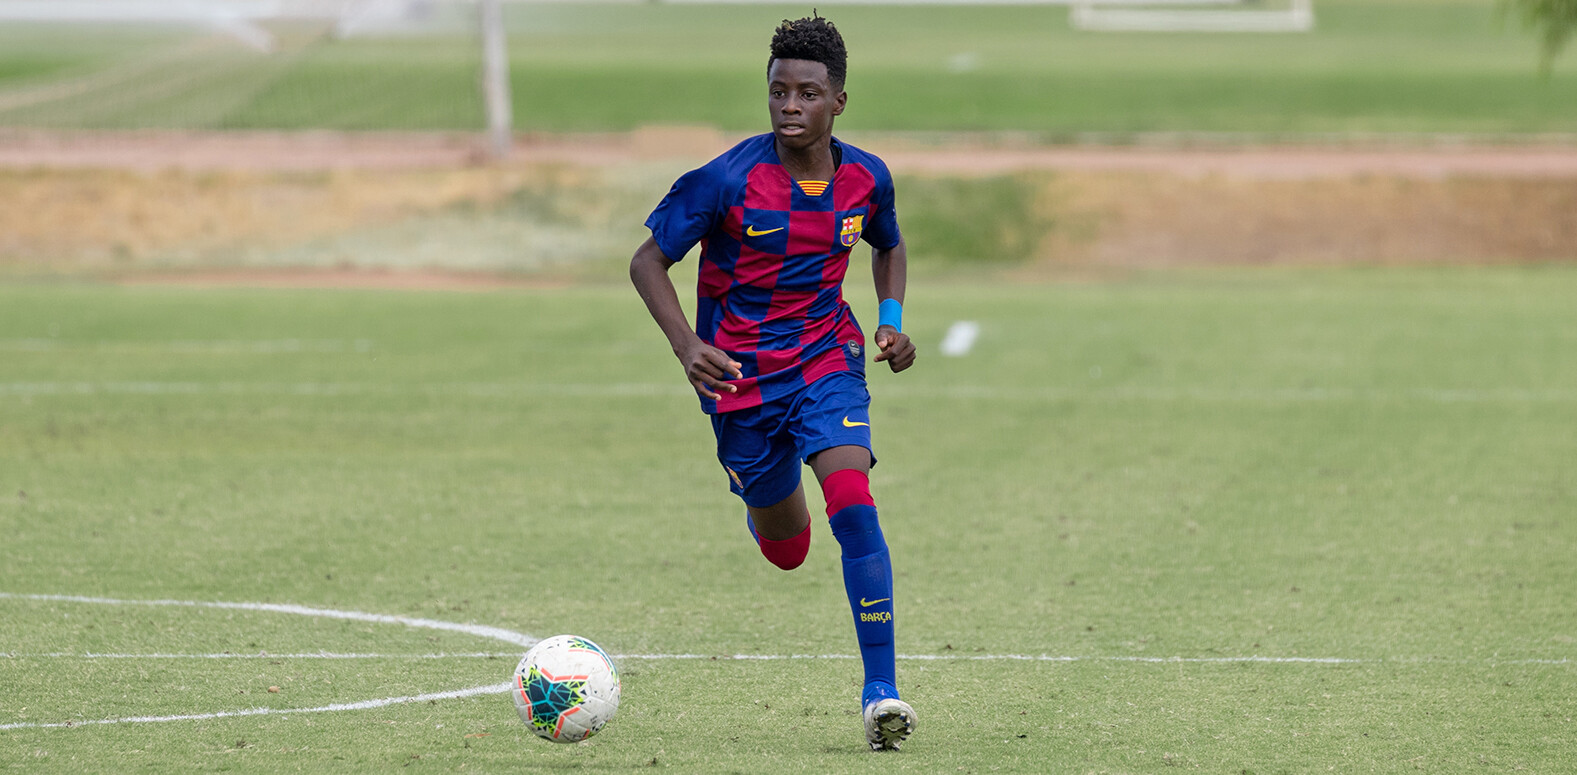 Barça Residency Academy's Brooklyn Raines driving the ball up the field